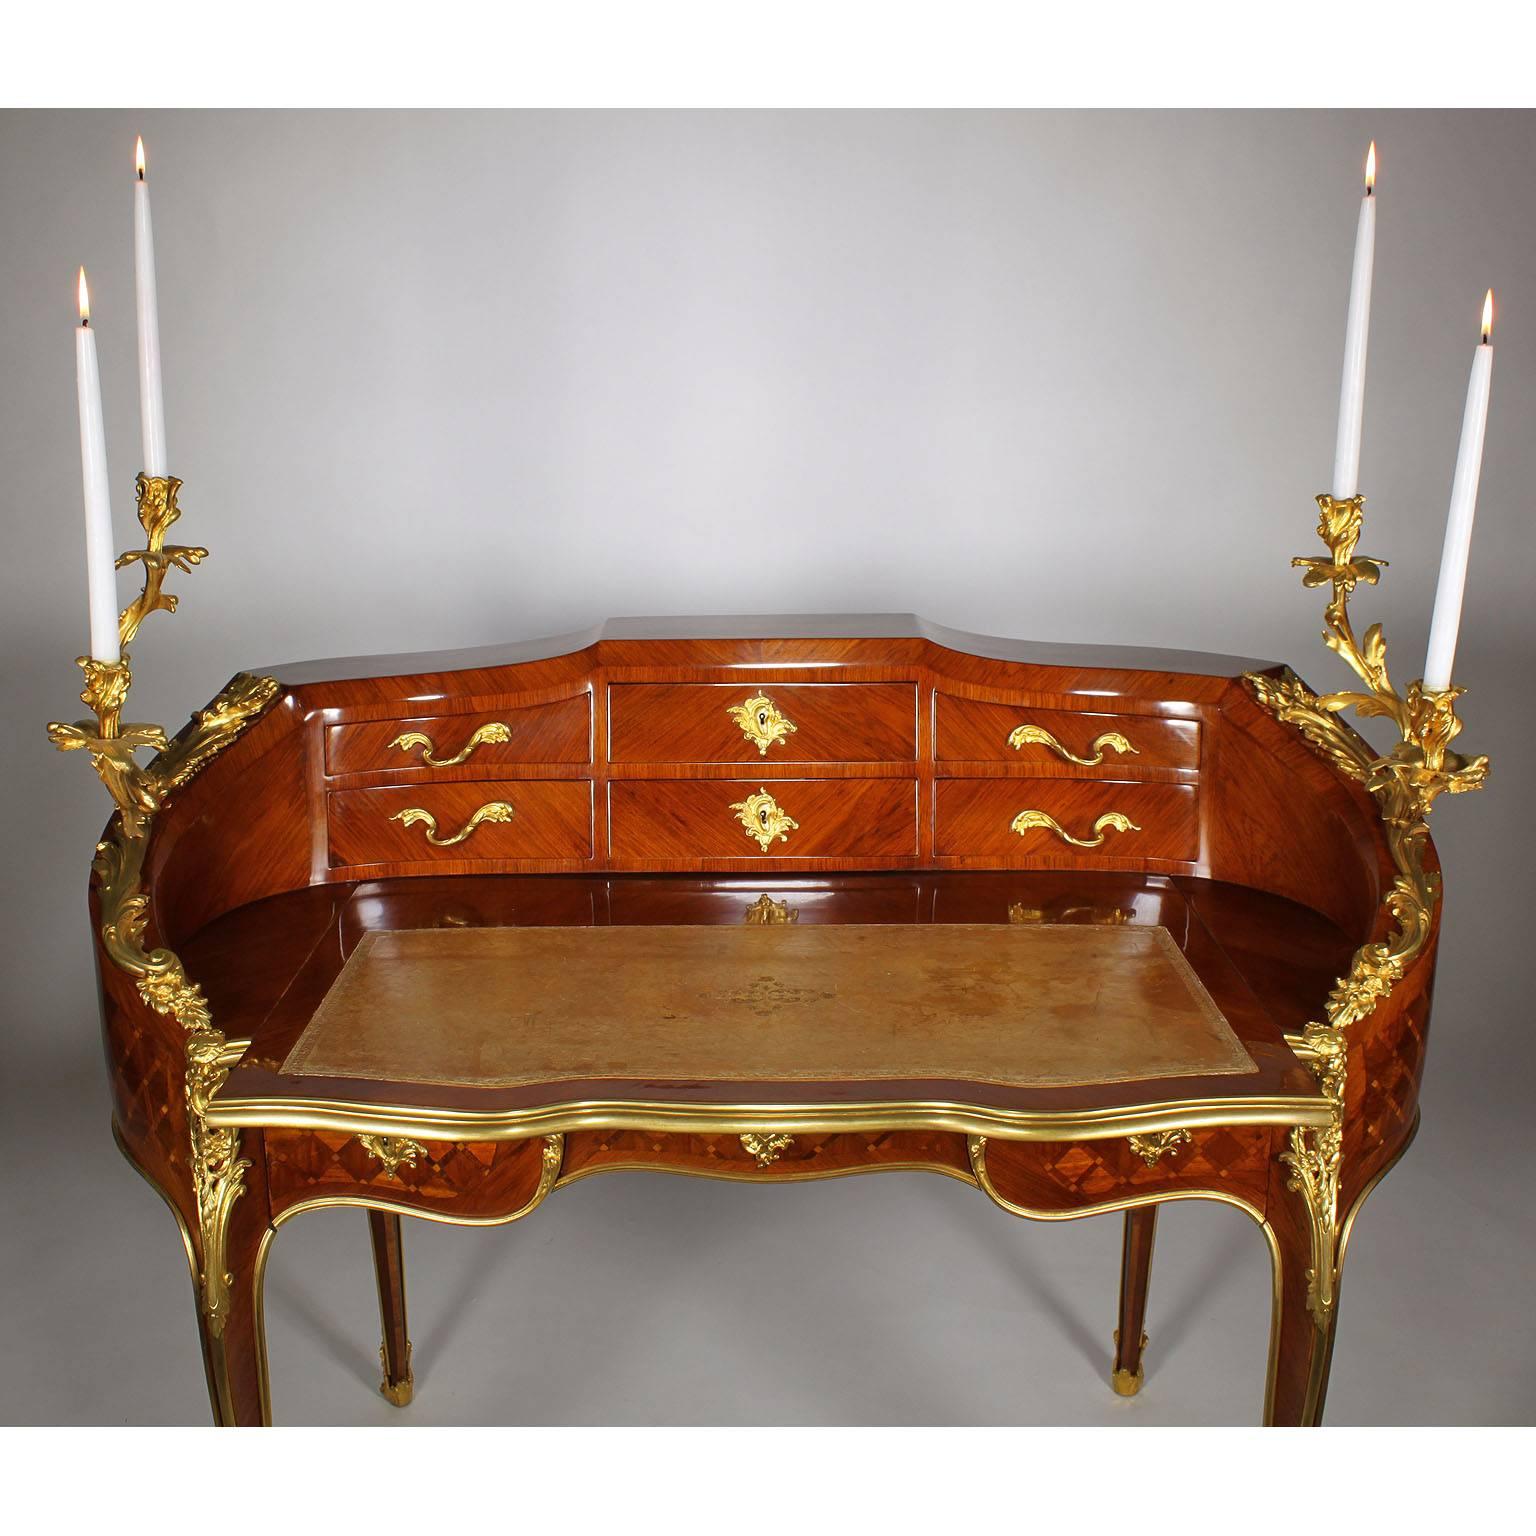 Embossed 19th Century Louis XV Style Gilt-Bronze Mounted Secretary, Attributed to Millet